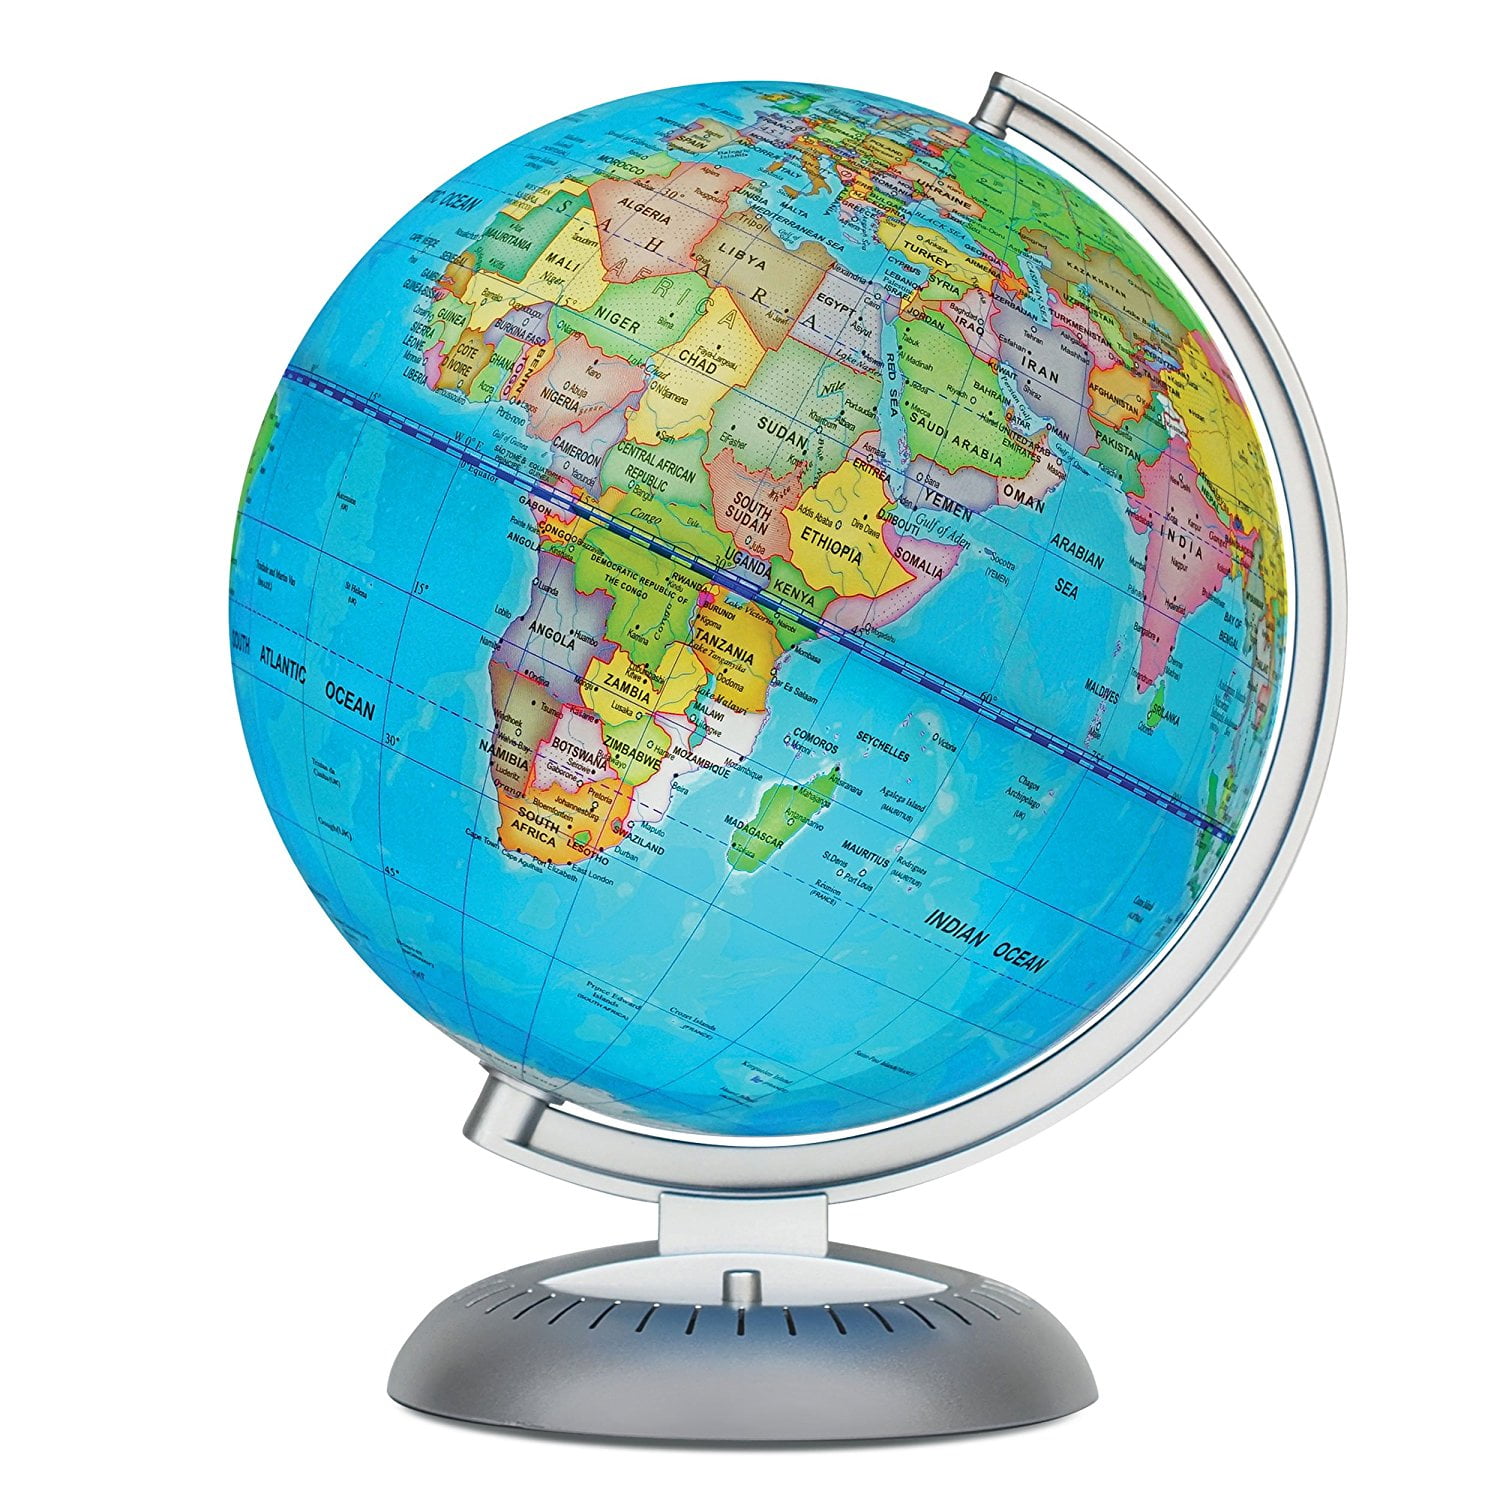 LED for Illuminated Night View Illuminated World Globe for Kids With Stand 